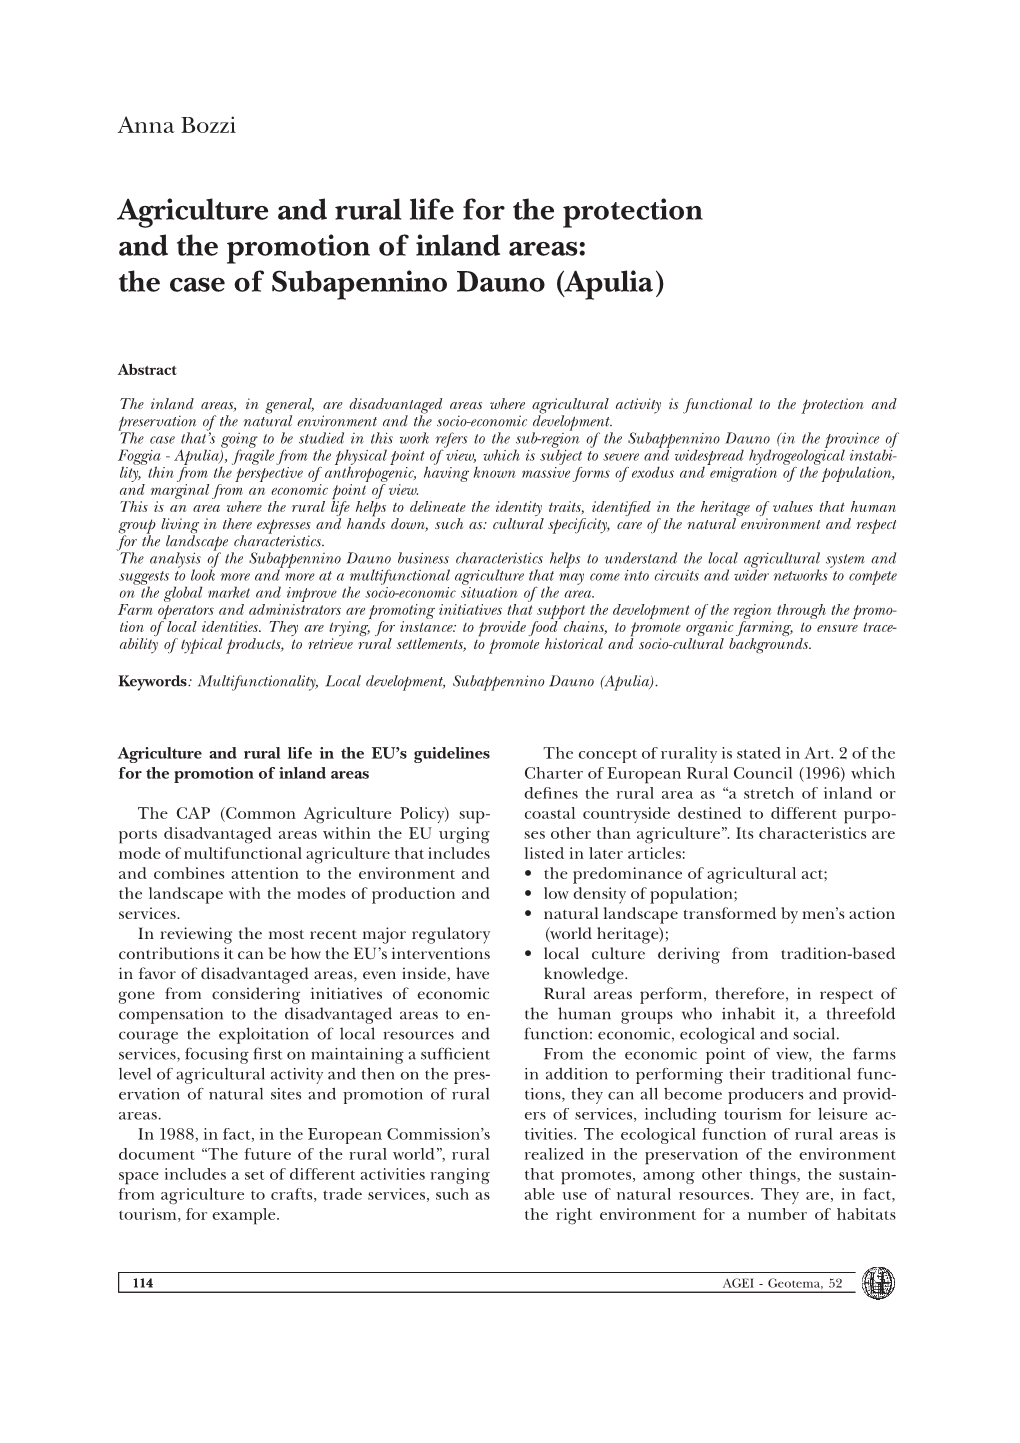 Agriculture and Rural Life for the Protection and the Promotion of Inland Areas: the Case of Subapennino Dauno (Apulia)